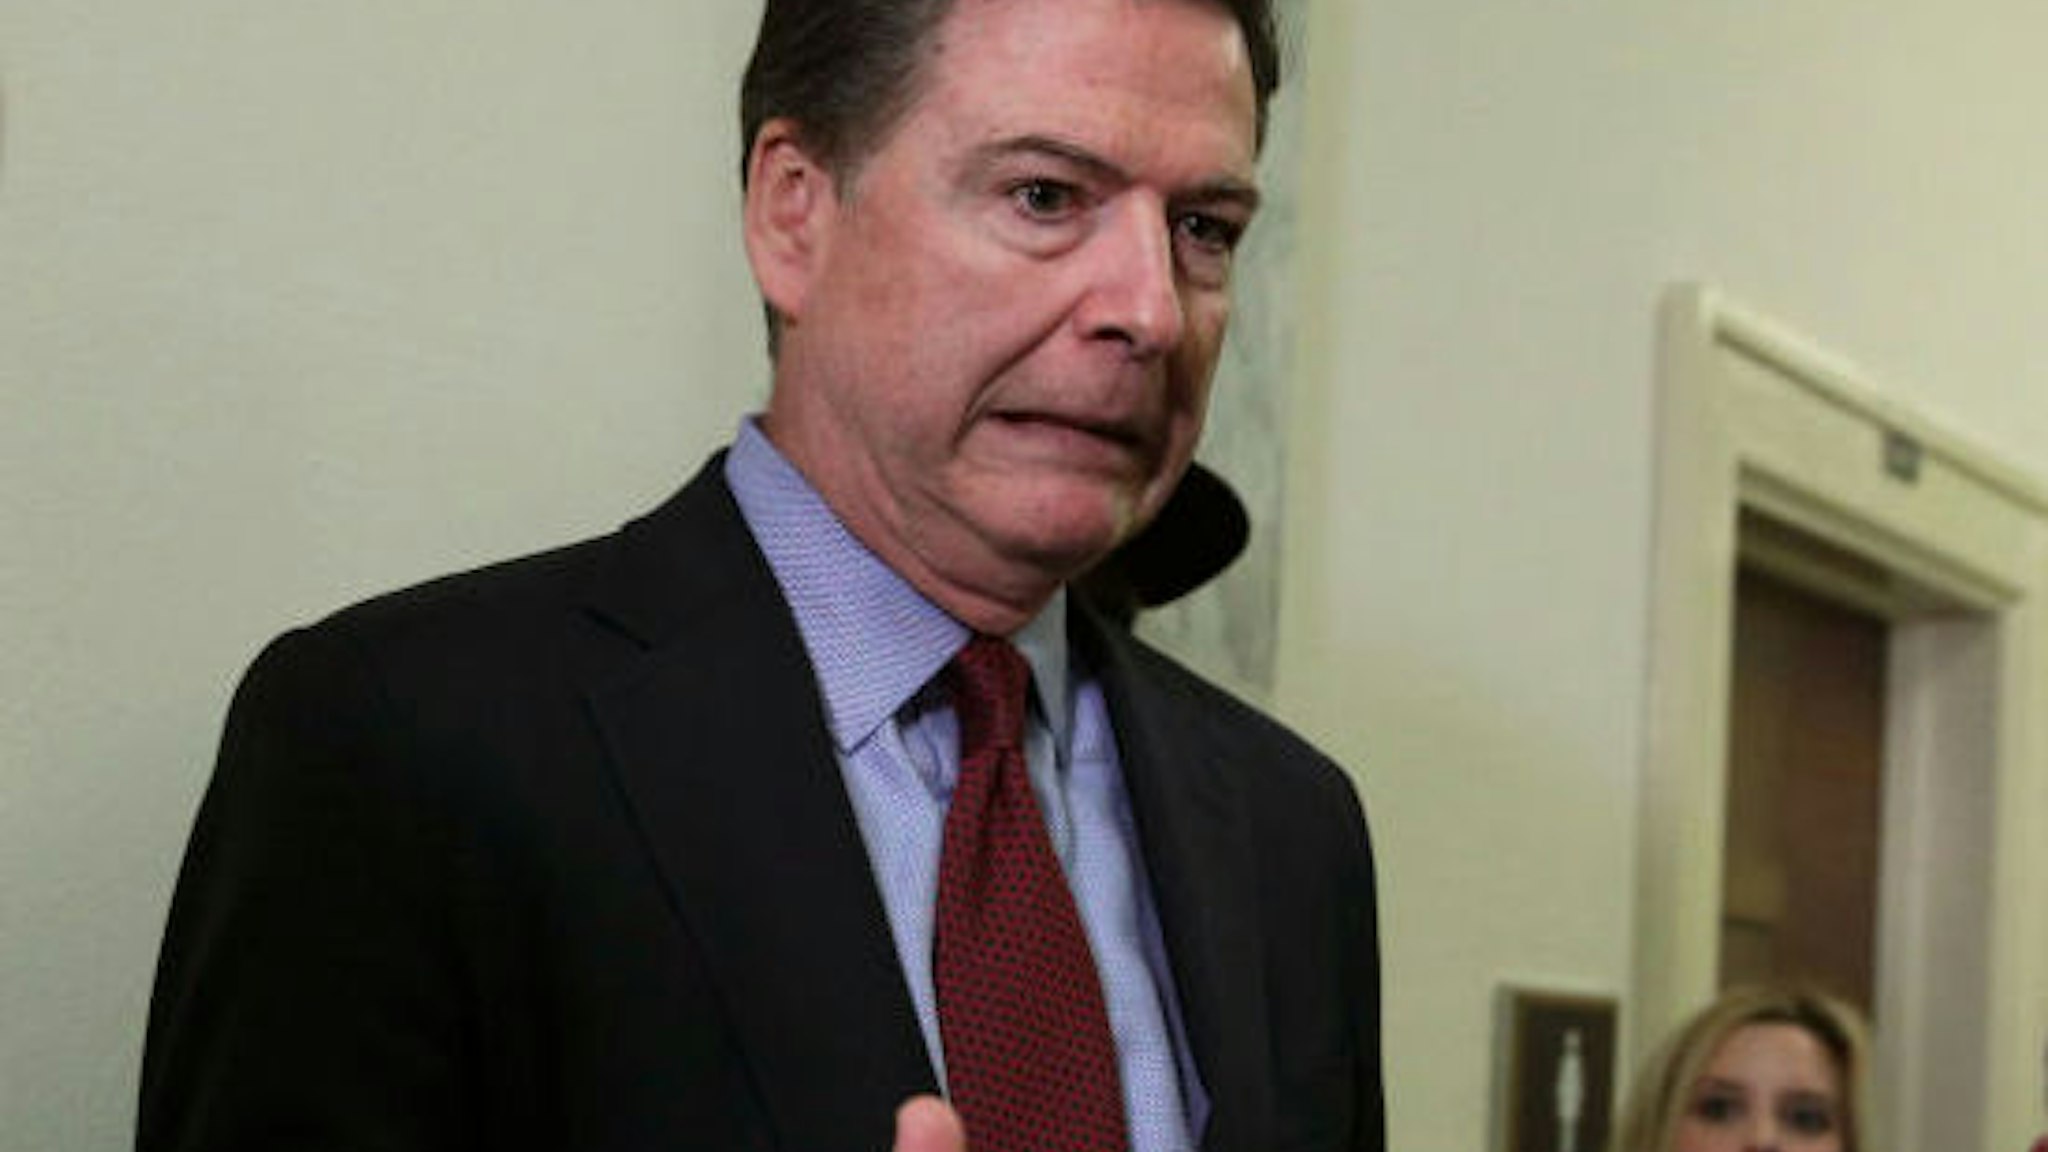 WASHINGTON, DC - DECEMBER 07: Former Federal Bureau of Investigation Director James Comey reacts as he approaches the microphone to speak to members of the media at the Rayburn House Office Building after testifying to the House Judiciary and Oversight and Government Reform committees on Capitol Hill December 07, 2018 in Washington, DC. With less than a month of control of the committees, House Republicans subpoenaed Comey to testify behind closed doors about investigations into Hillary Clinton‚Äôs email server and whether President Trump‚Äôs campaign advisers colluded with the Russian government to steer the outcome of the 2016 presidential election.